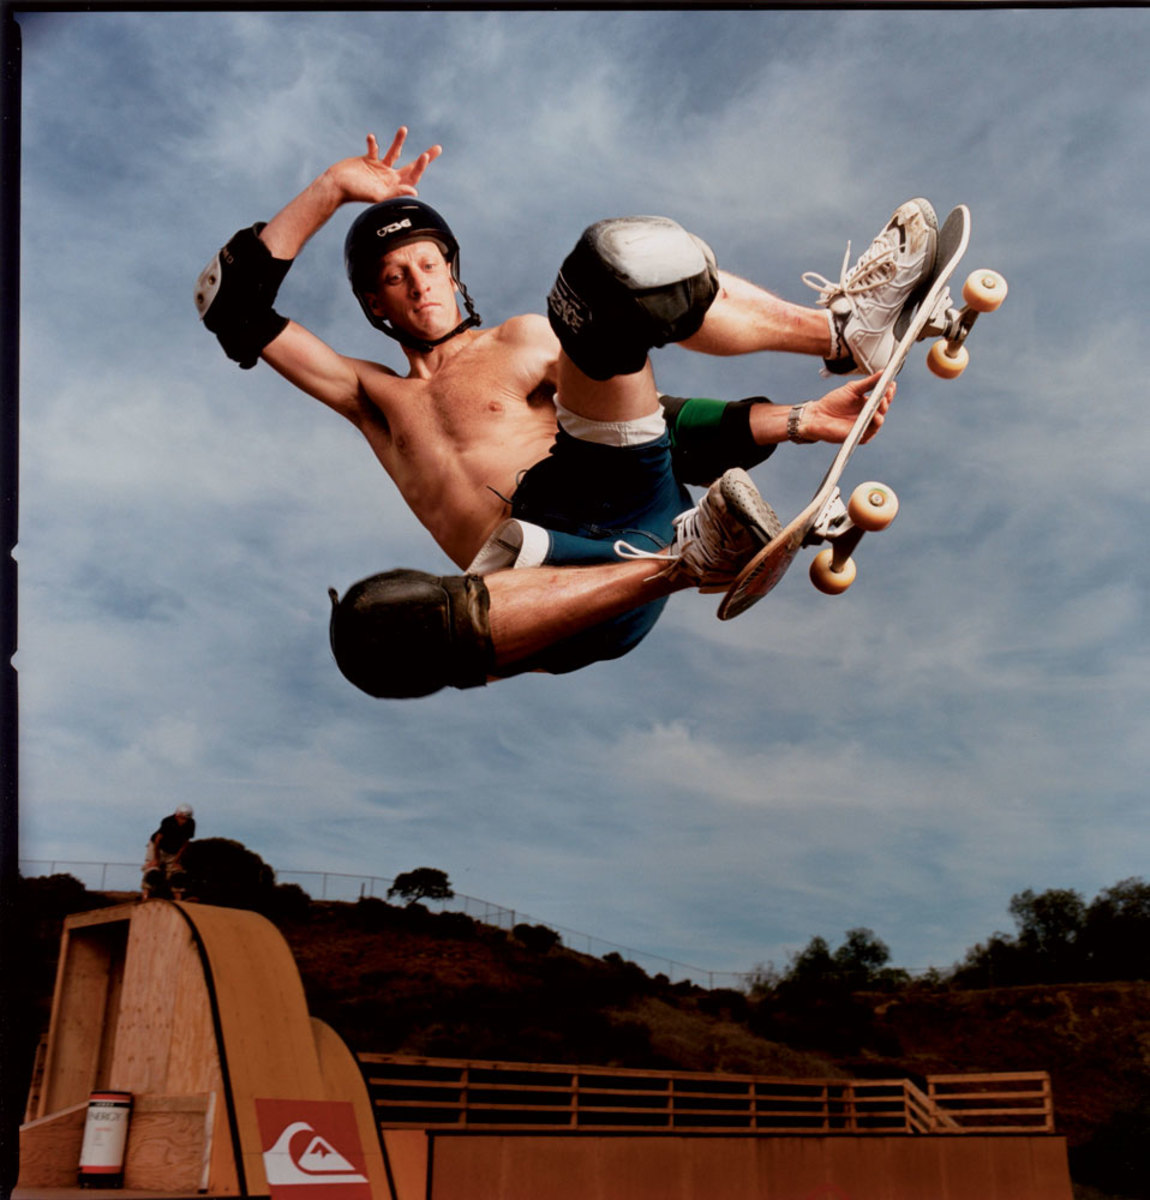 Tony Hawk continues to thrill, lift skateboarding to new heights